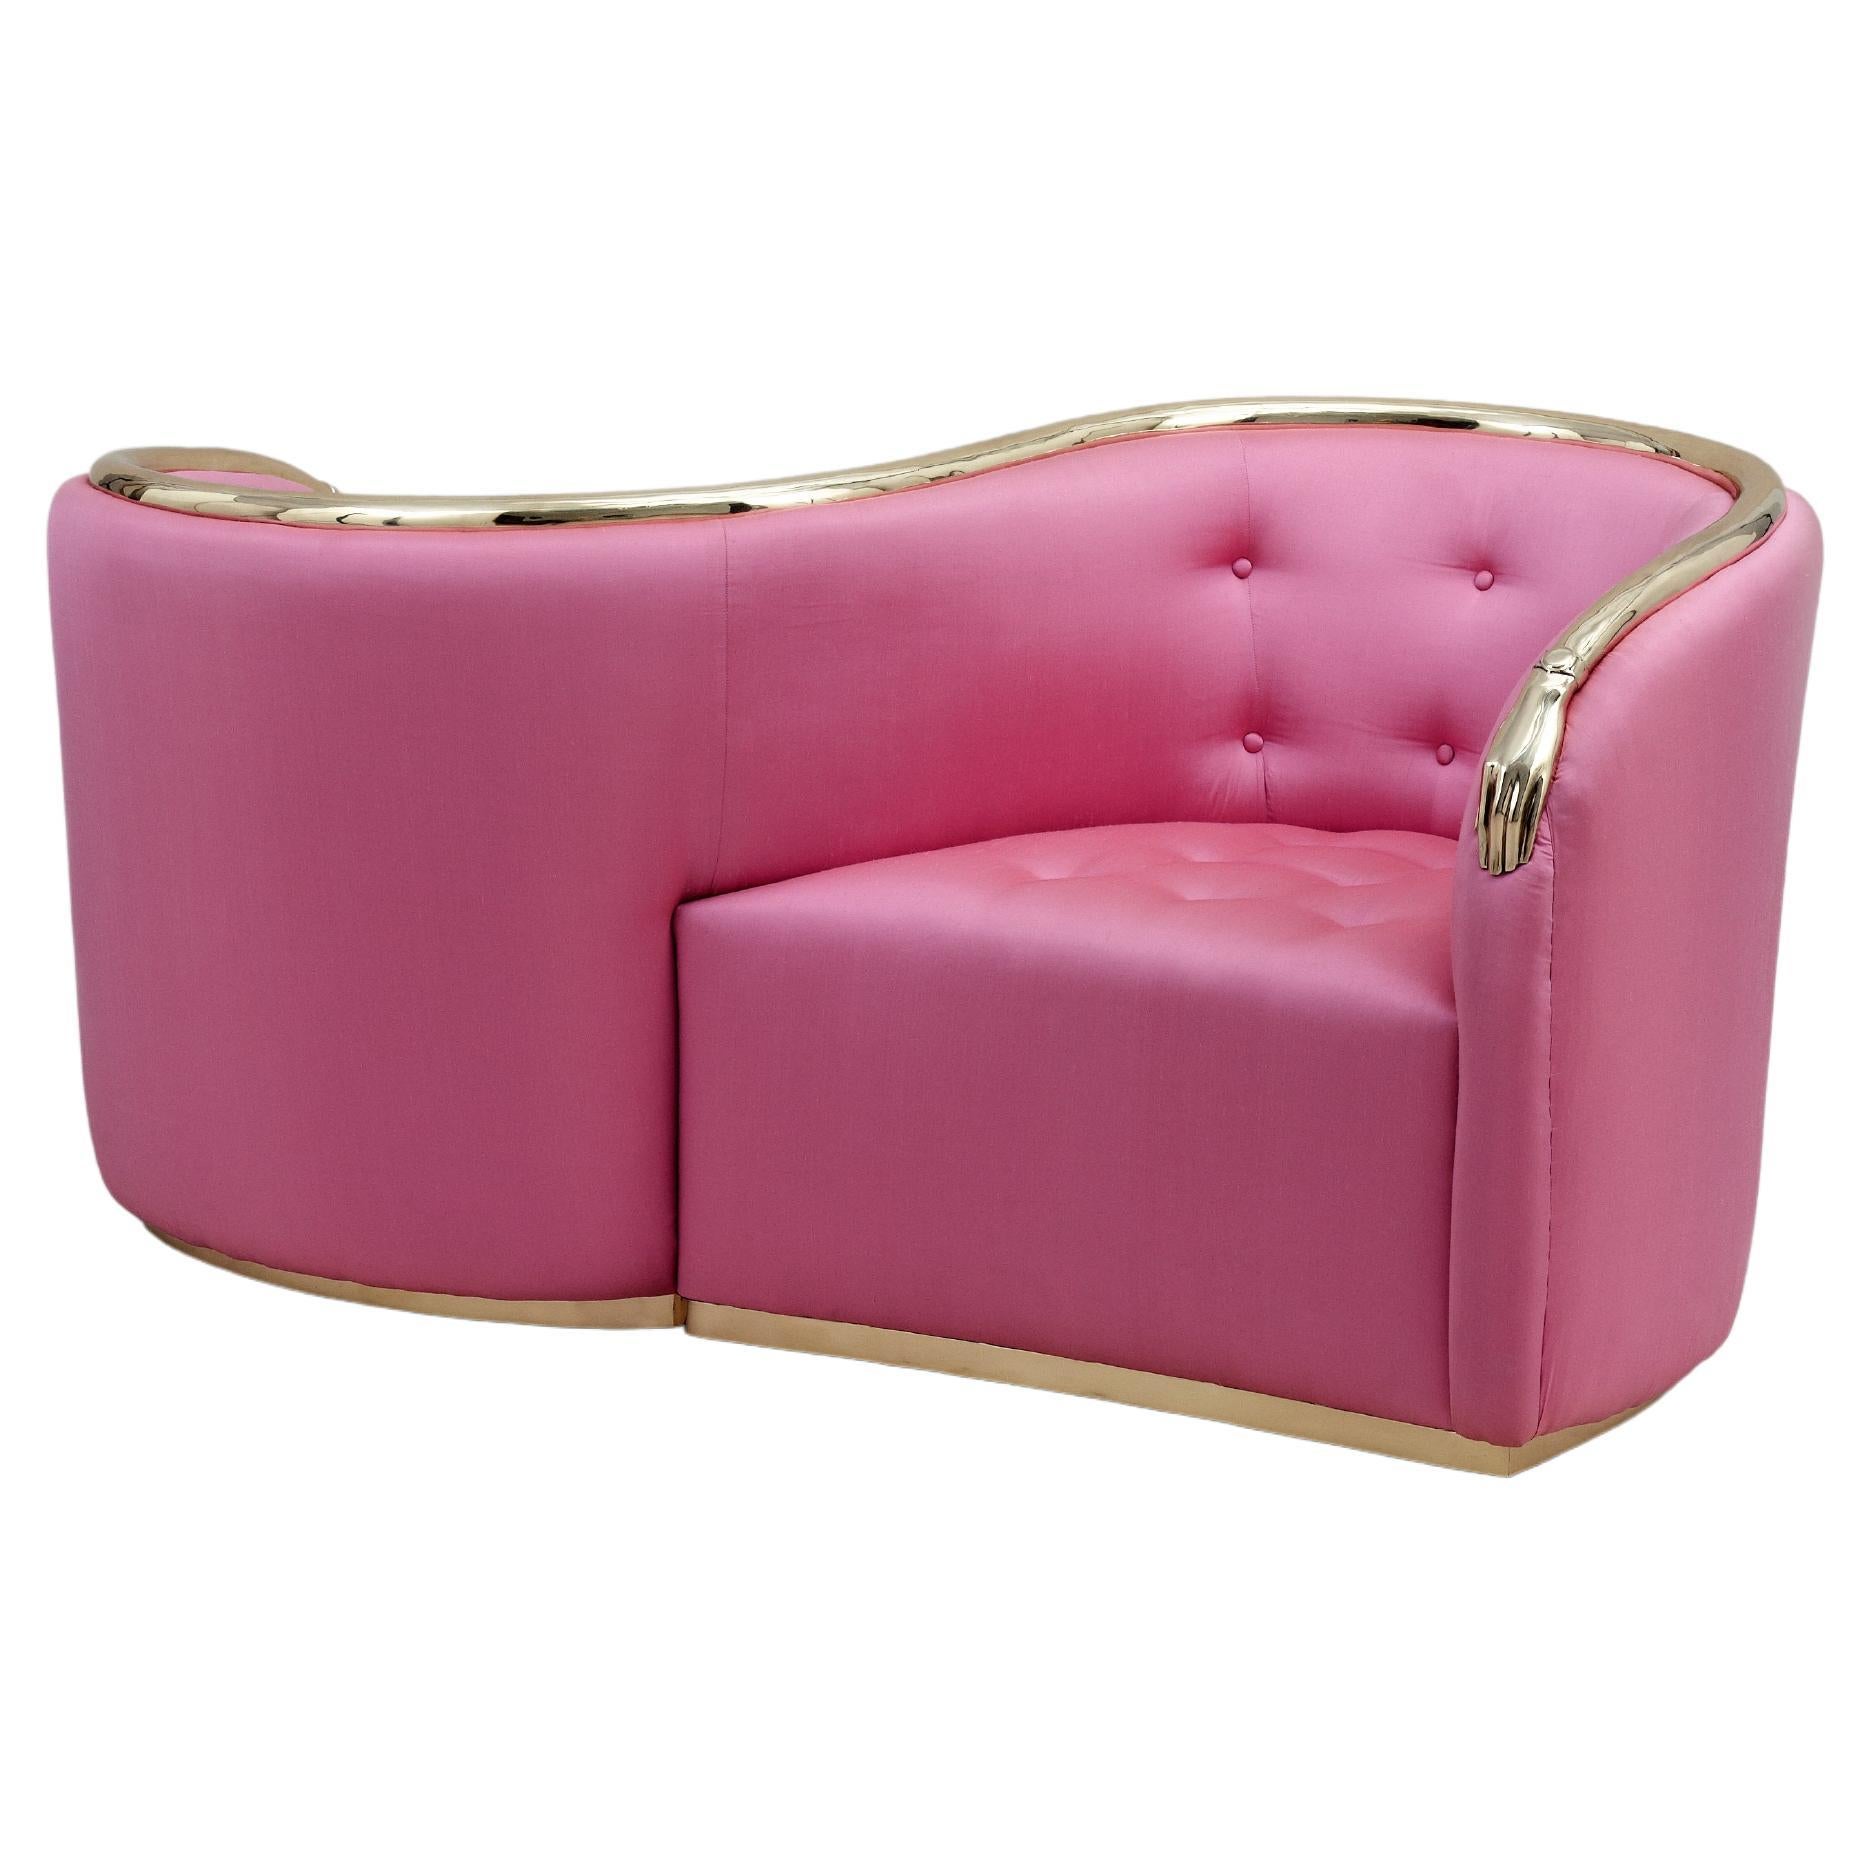 Vis a Vis sofa in pink and solid brass by Salvador Dalí For Sale at 1stDibs